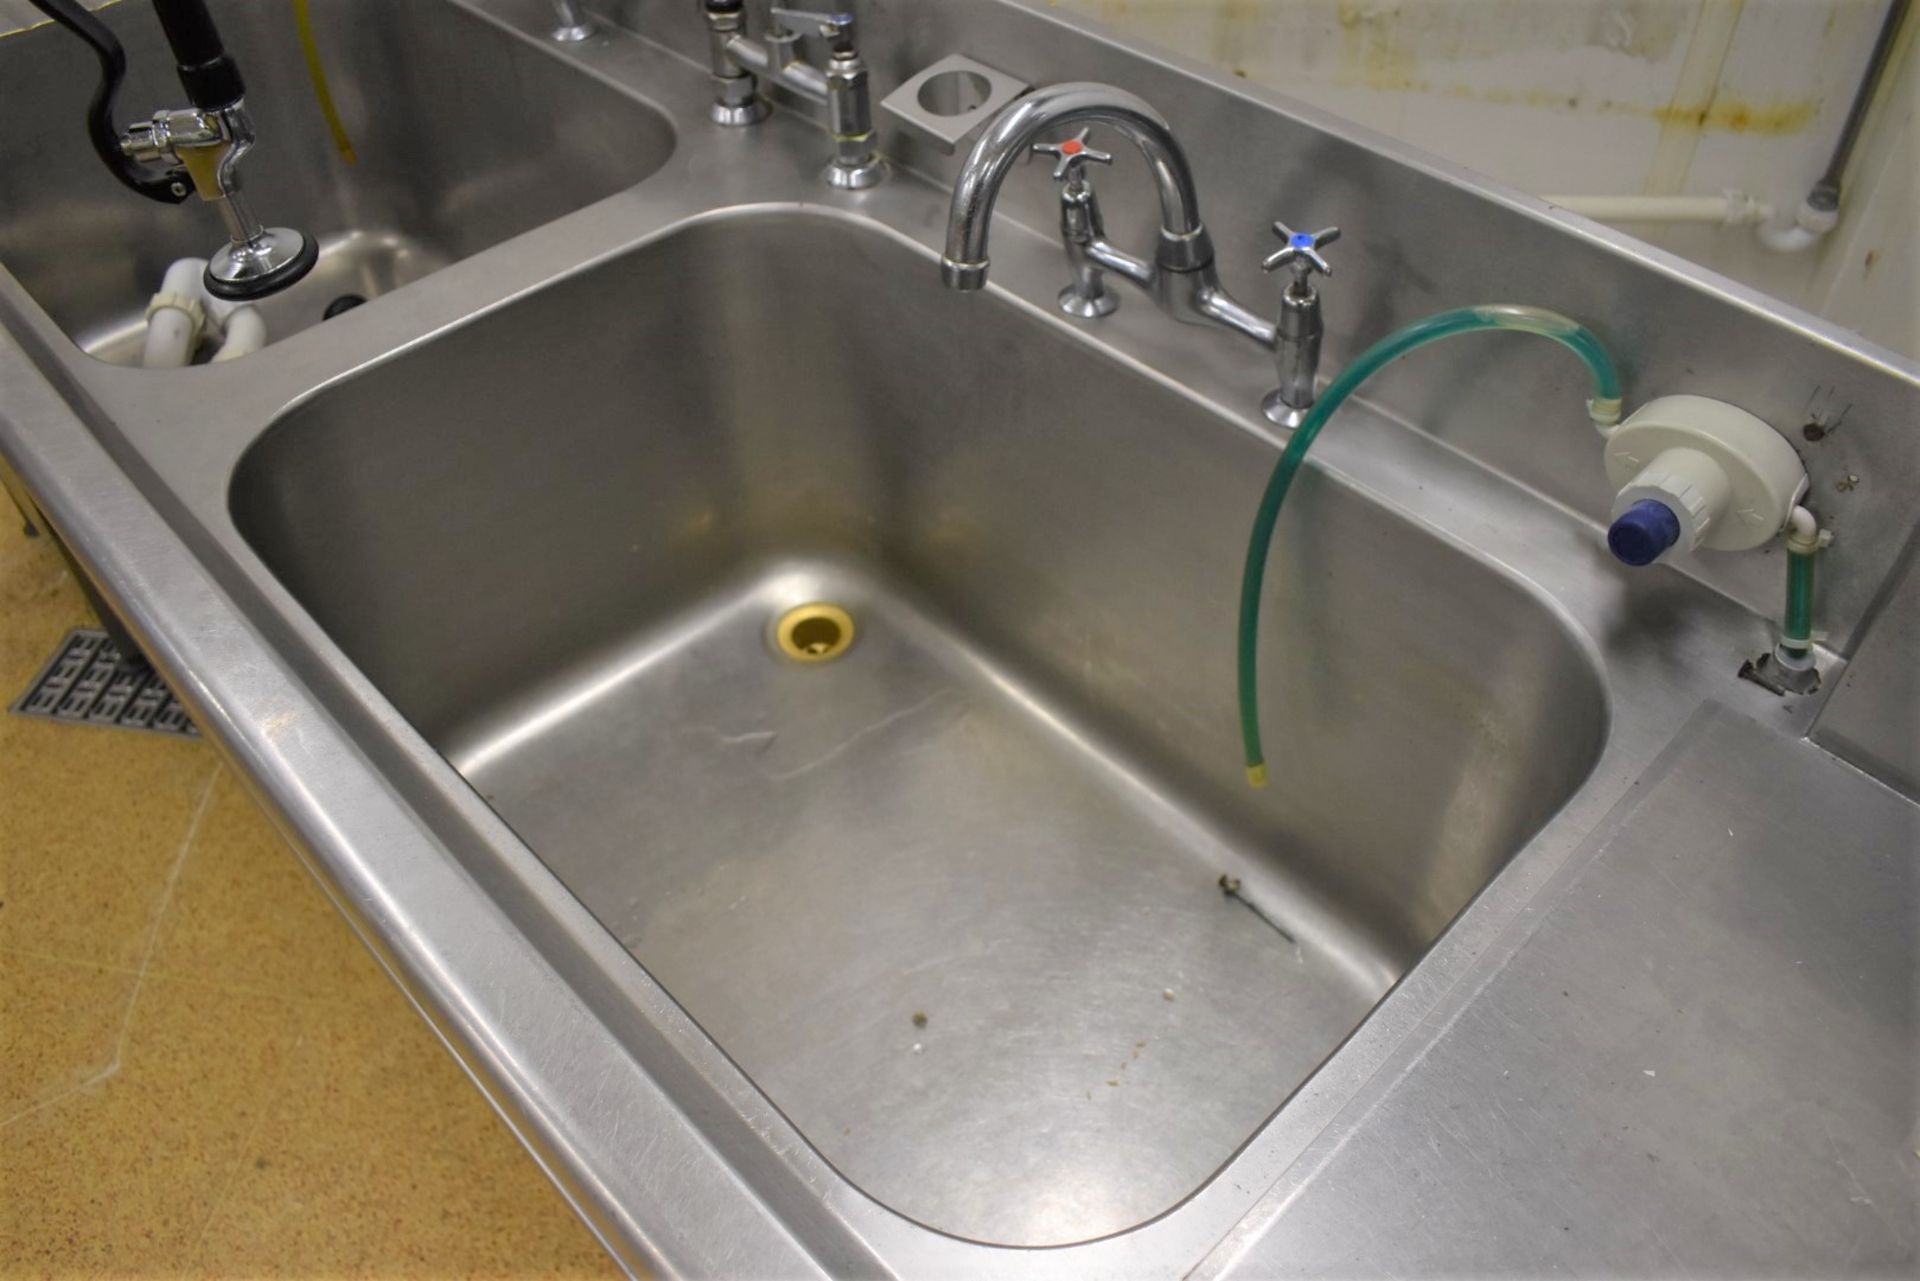 1 x Large Stainless Steel Wash Unit With Twin Deep Sink Basins, Hose Rinser Tap, Mixer Taps, - Image 4 of 10